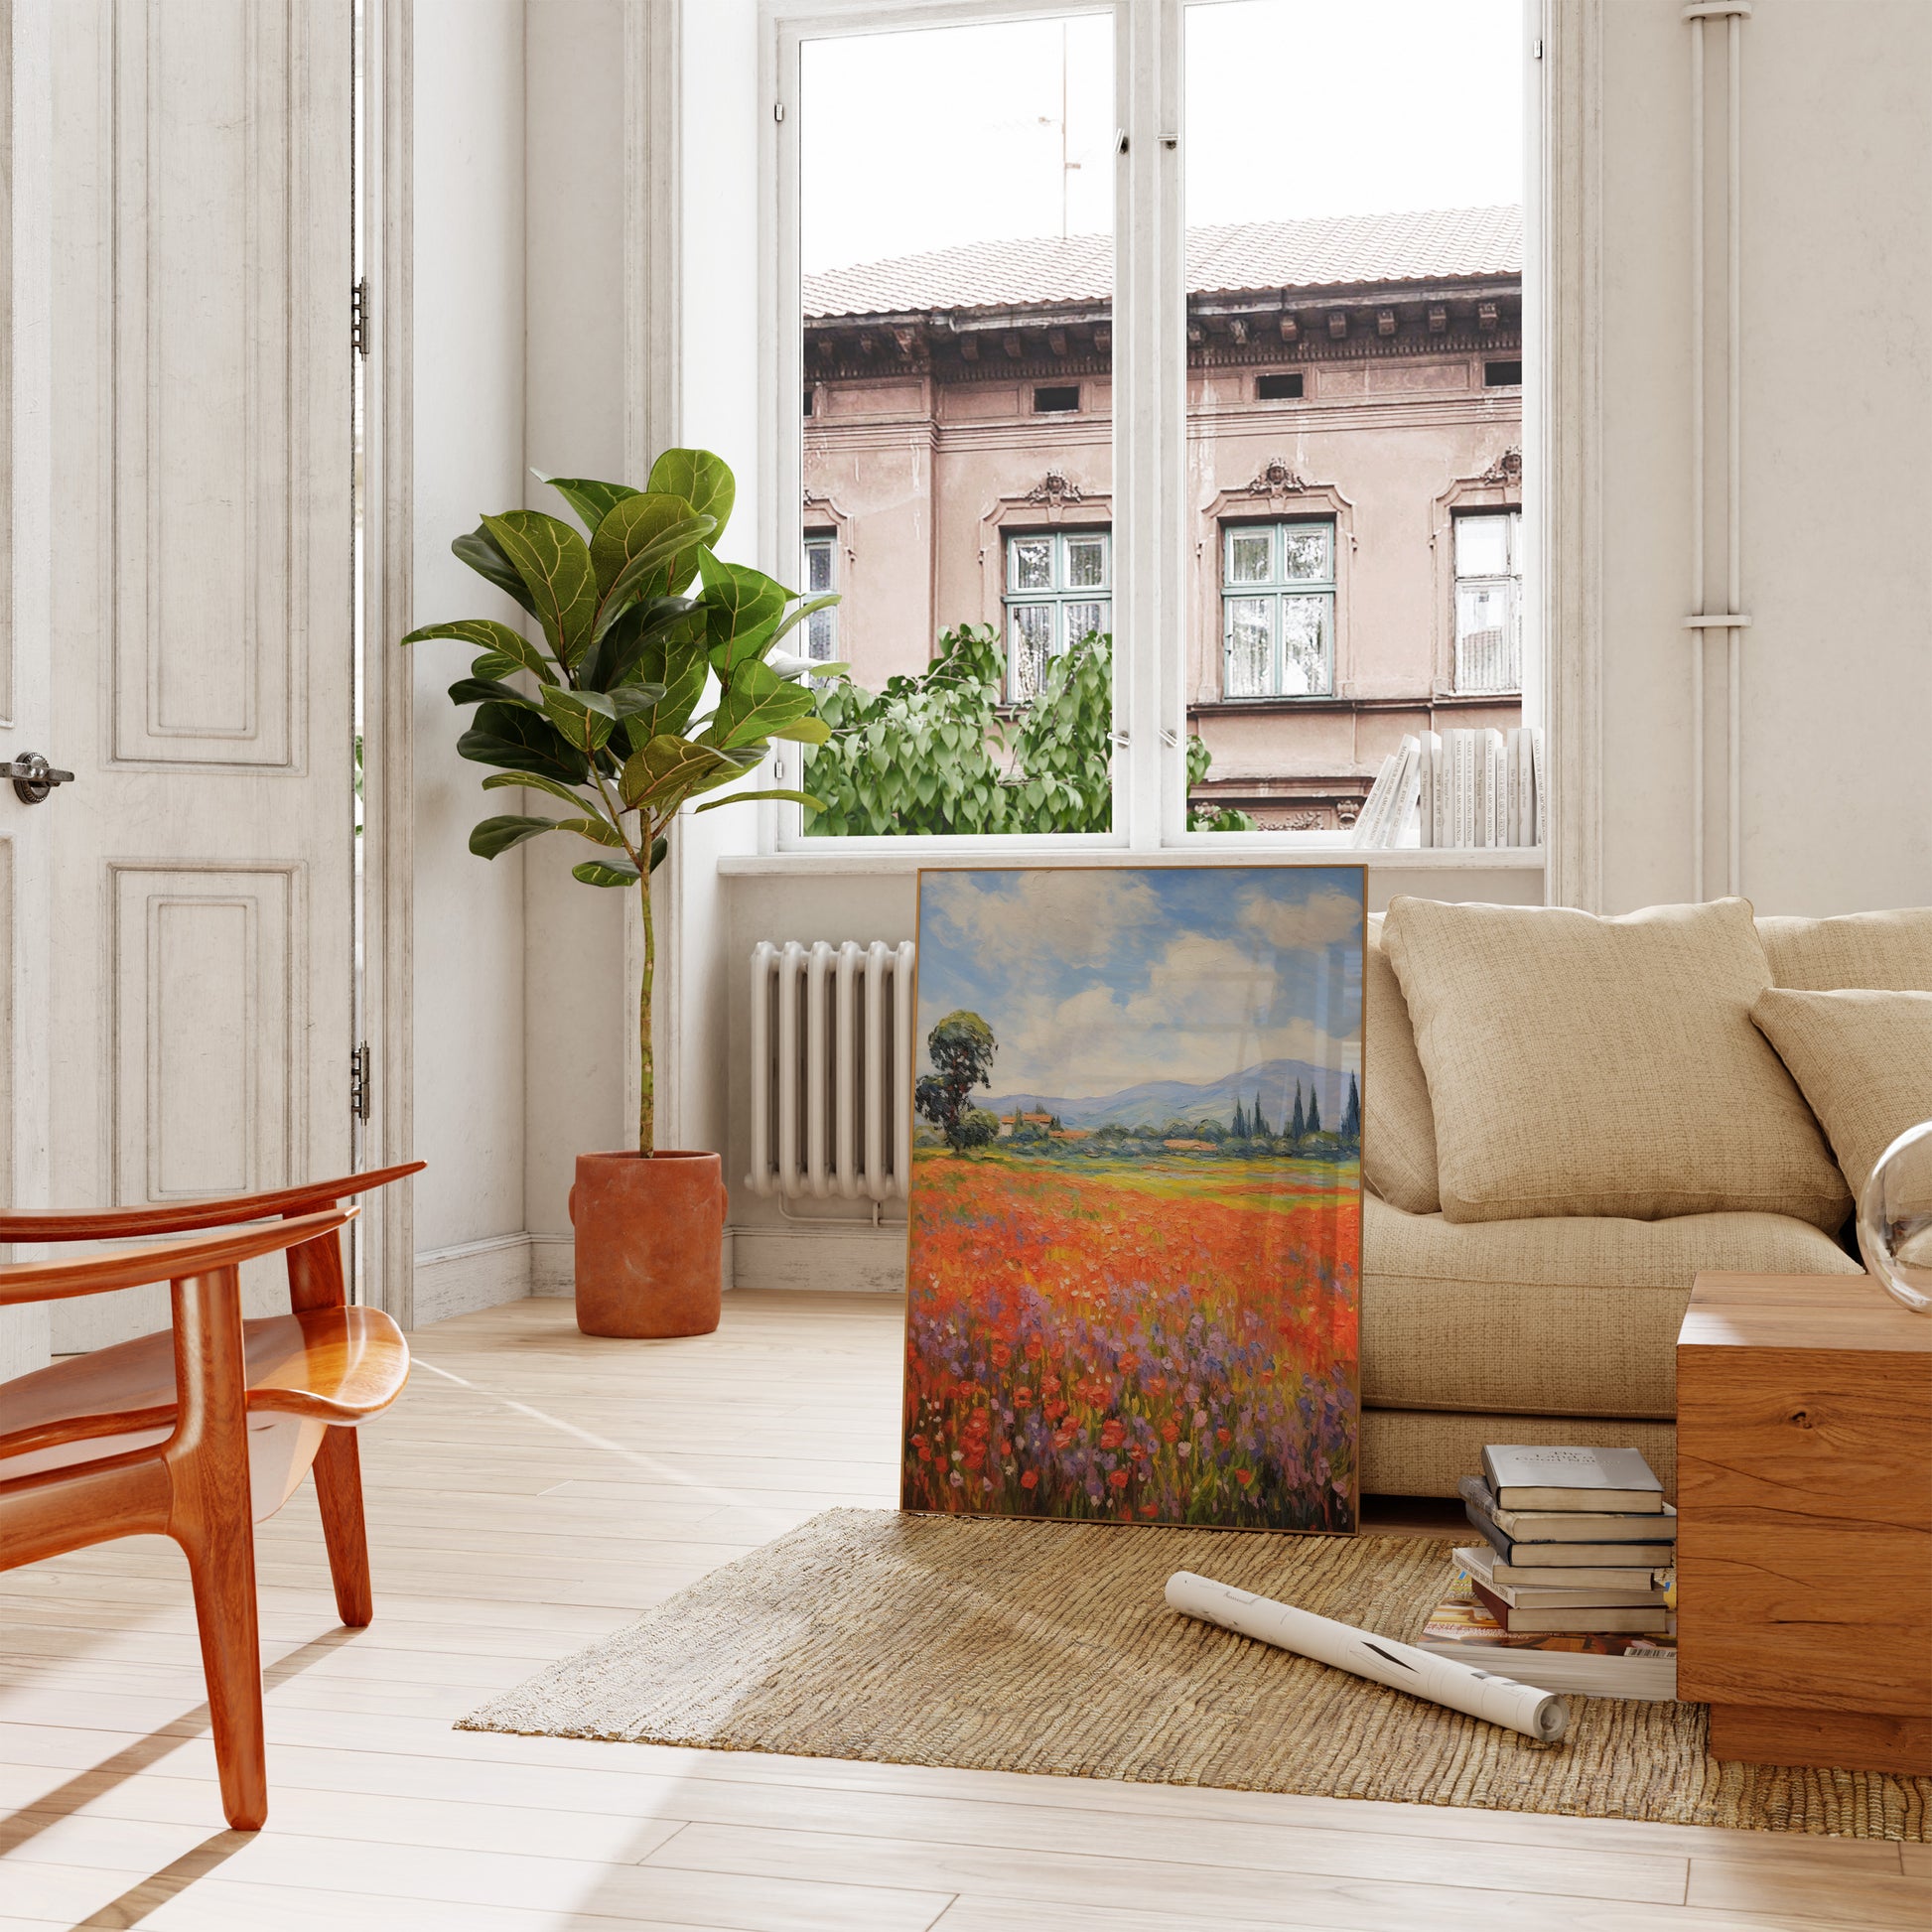 A bright living room with a landscape painting, a sofa, and a large plant near an open window.